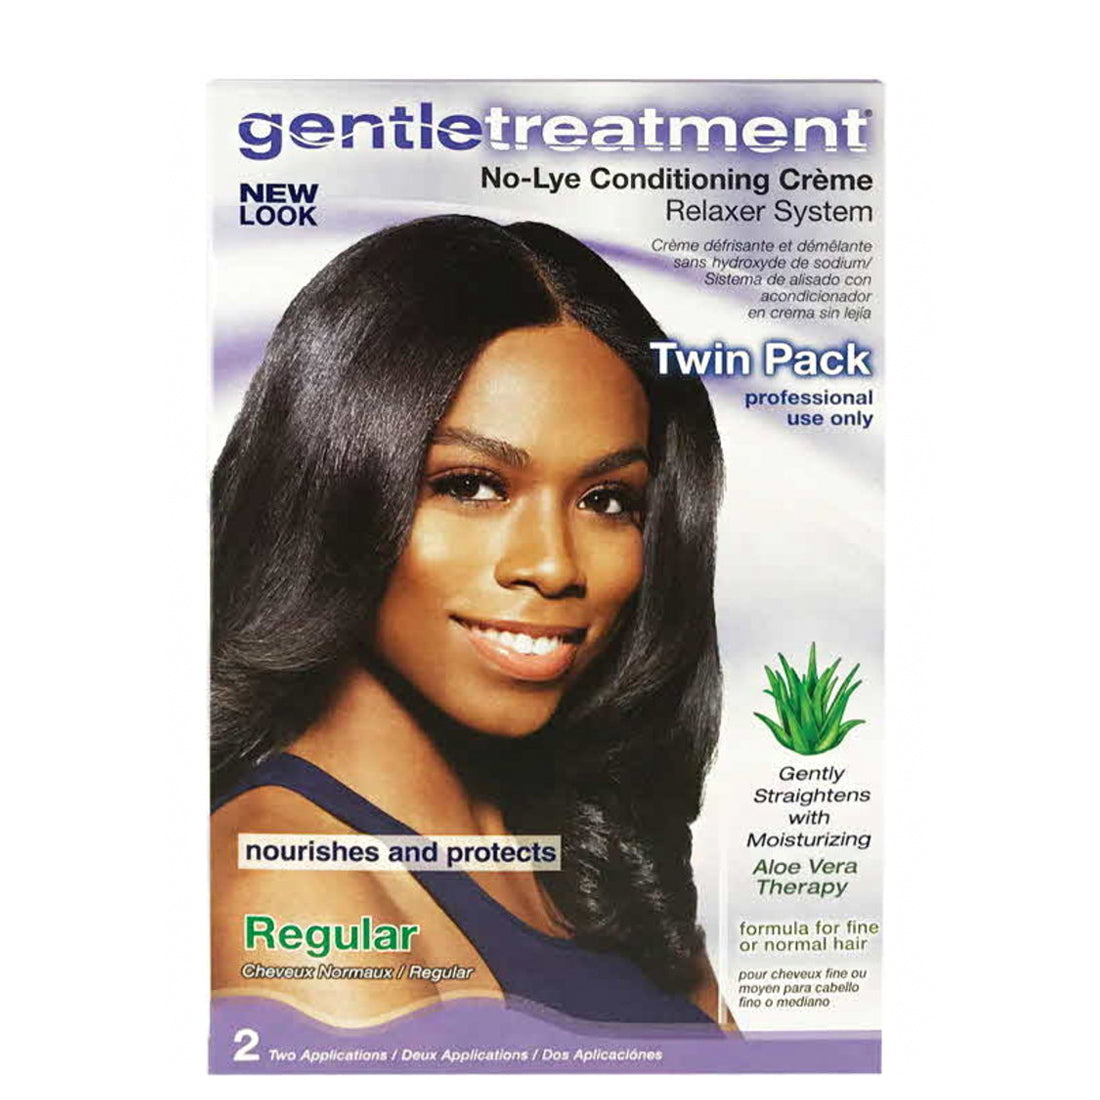 Gentle Treatment No-Lye Conditioning Creme Relaxer Twin Pack - Regular